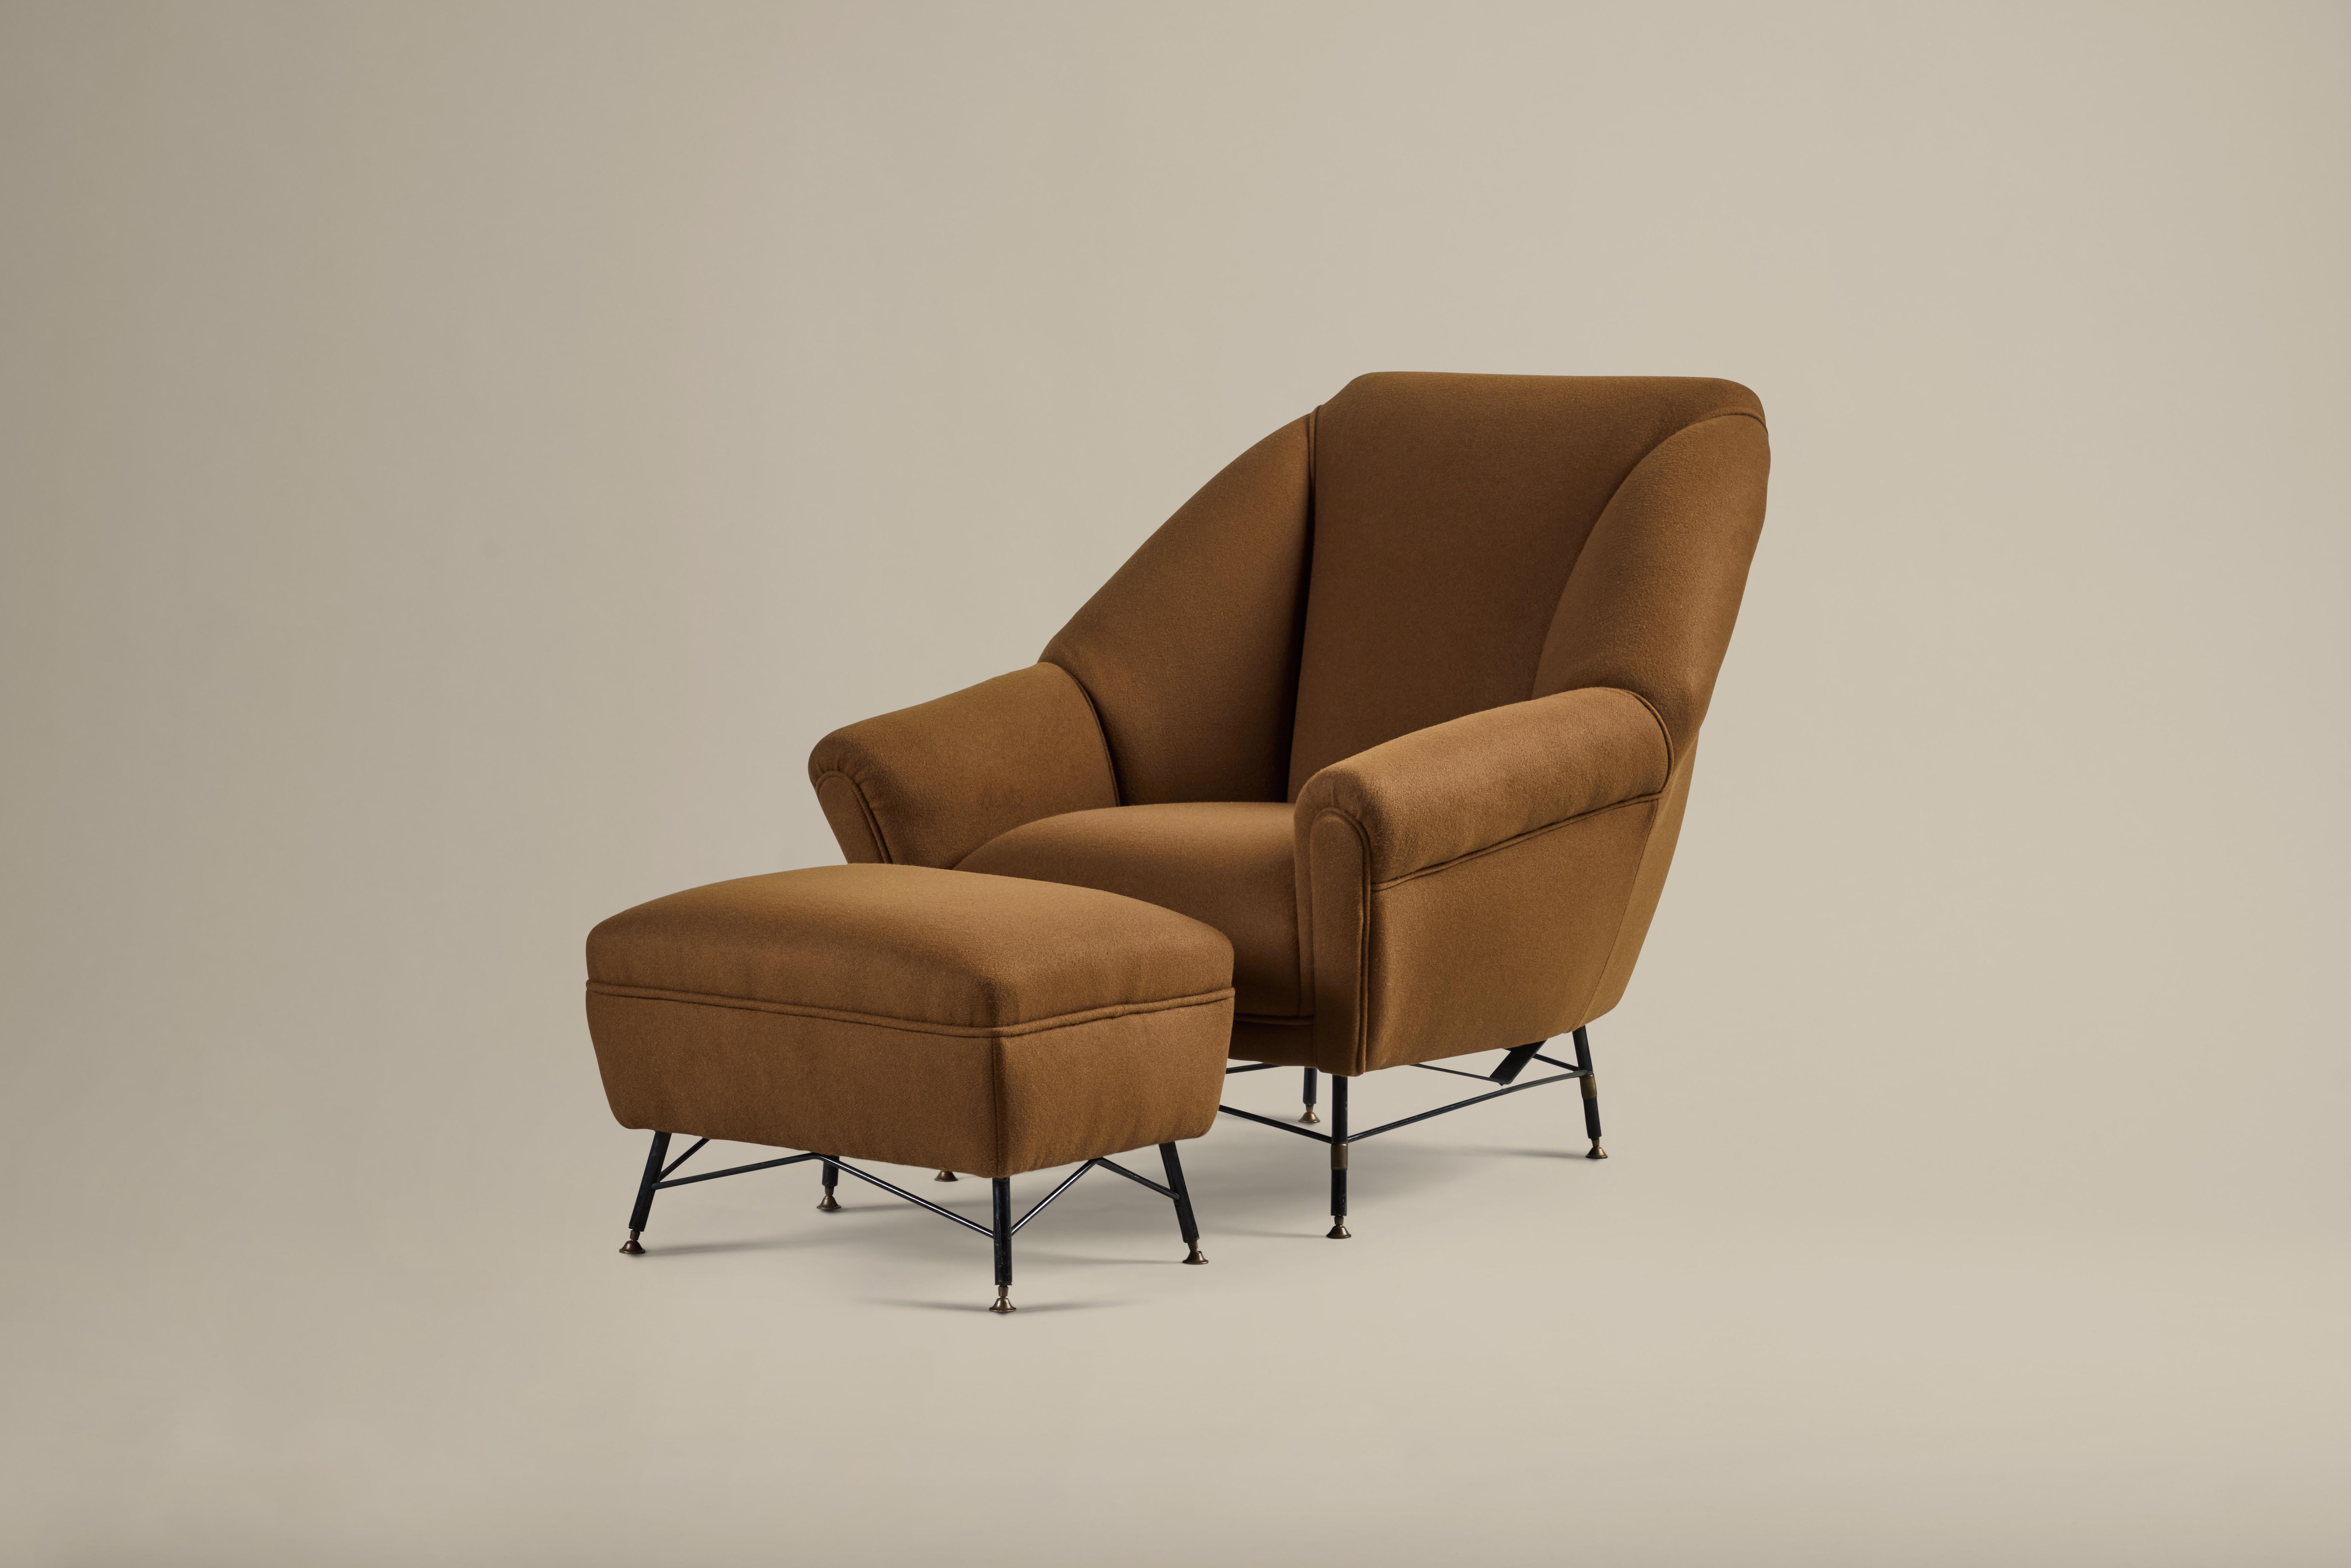 This fabric and metal lounge chair and ottoman are designed in the style of Augusto Bozzi, with Eiffel legs and tailored brown upholstery. Vintage condition with new upholstery. Wear consistent with age and use. See images for details.

Chair